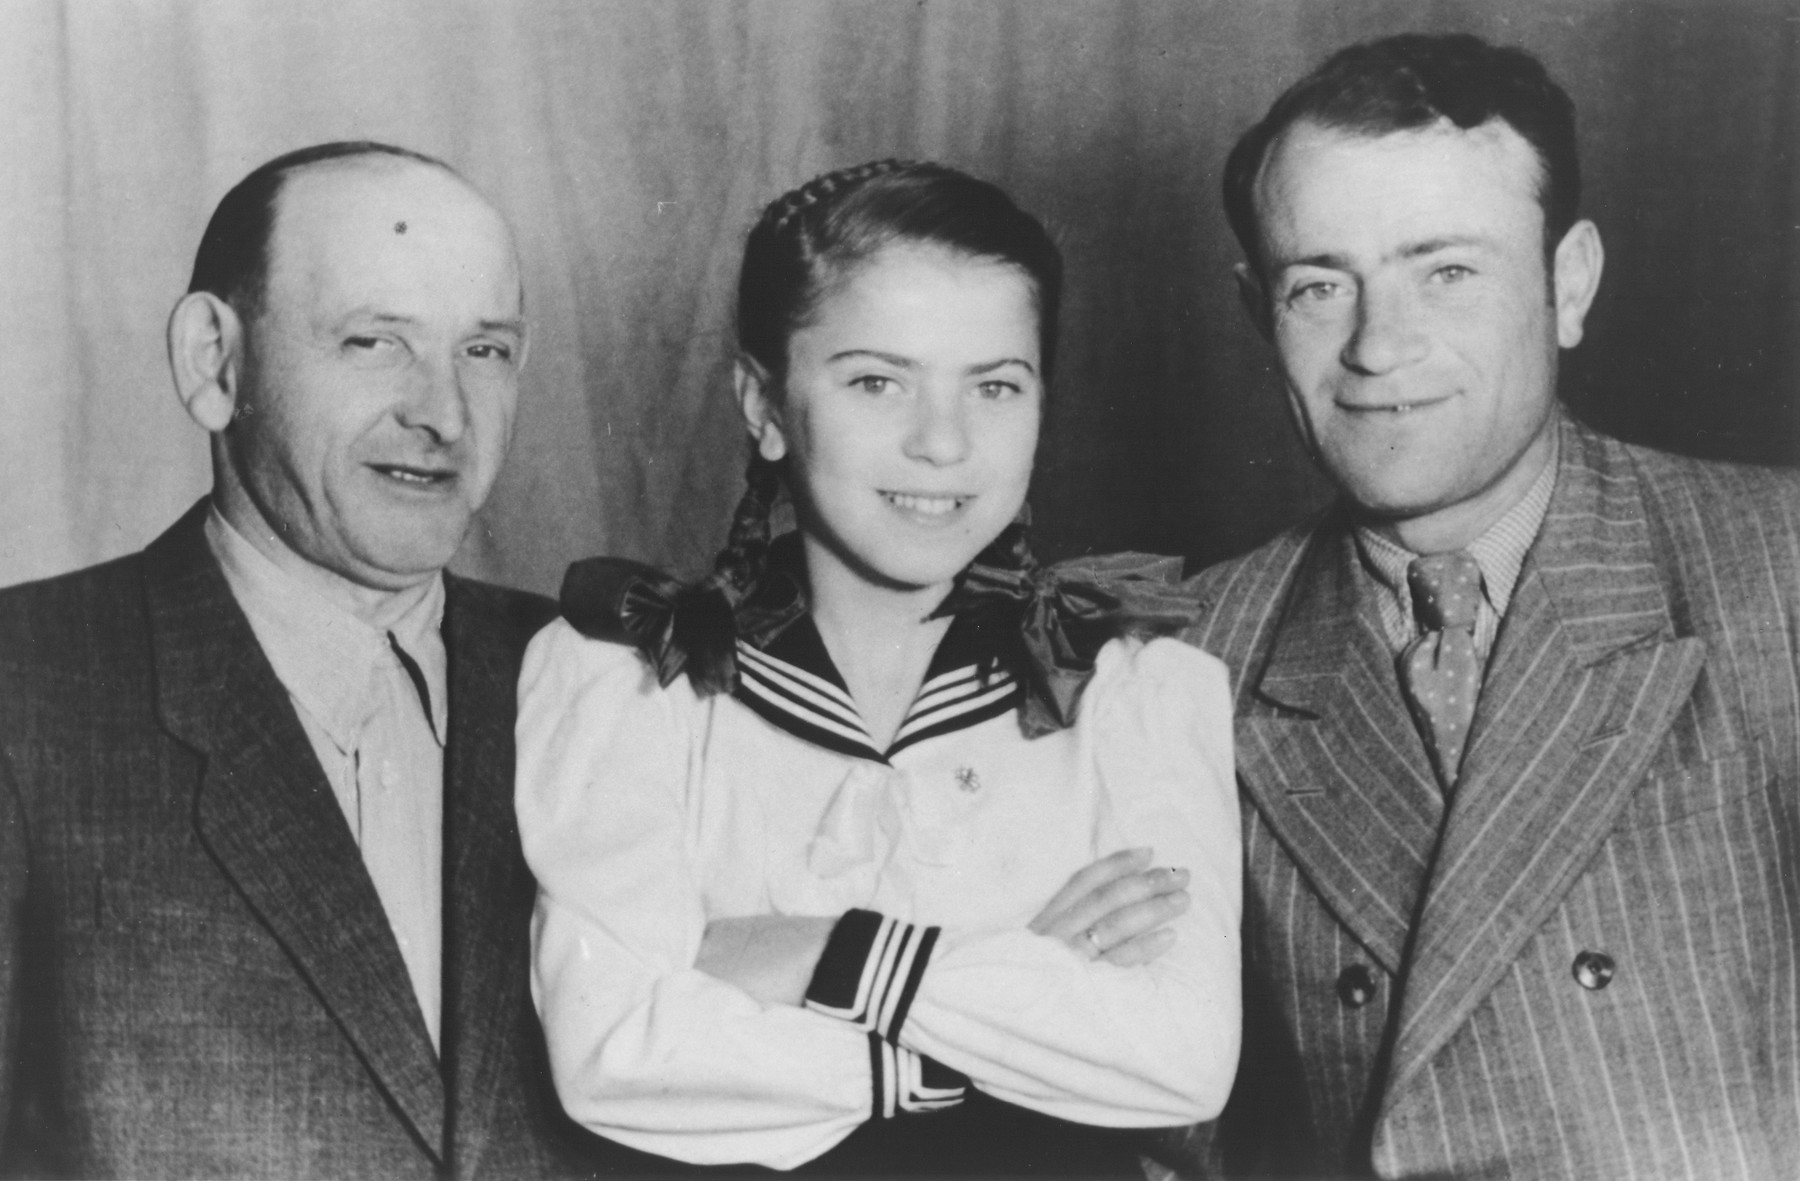 Chuma Rendler poses with her father Anchel and his cousin Israel Shusterkatz in a studio photo in the Tempelhof DP camp.